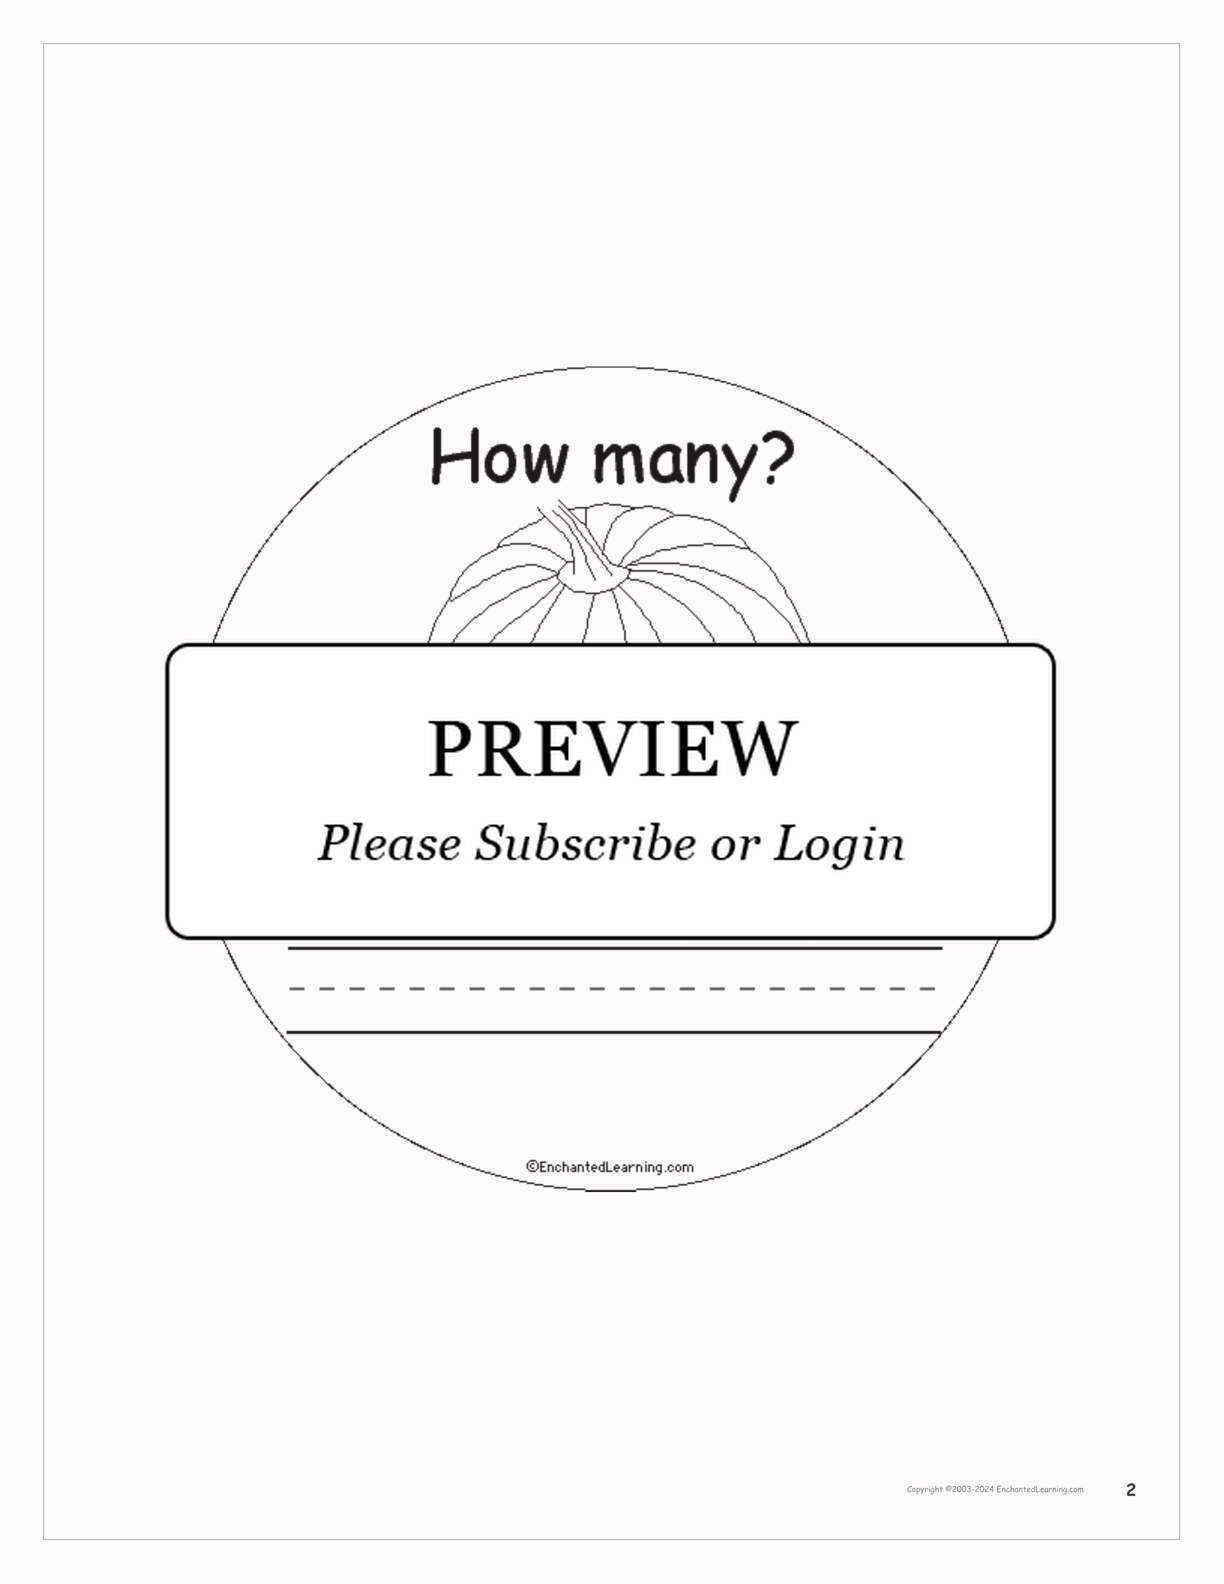 How Many Pumpkins? interactive printout page 2